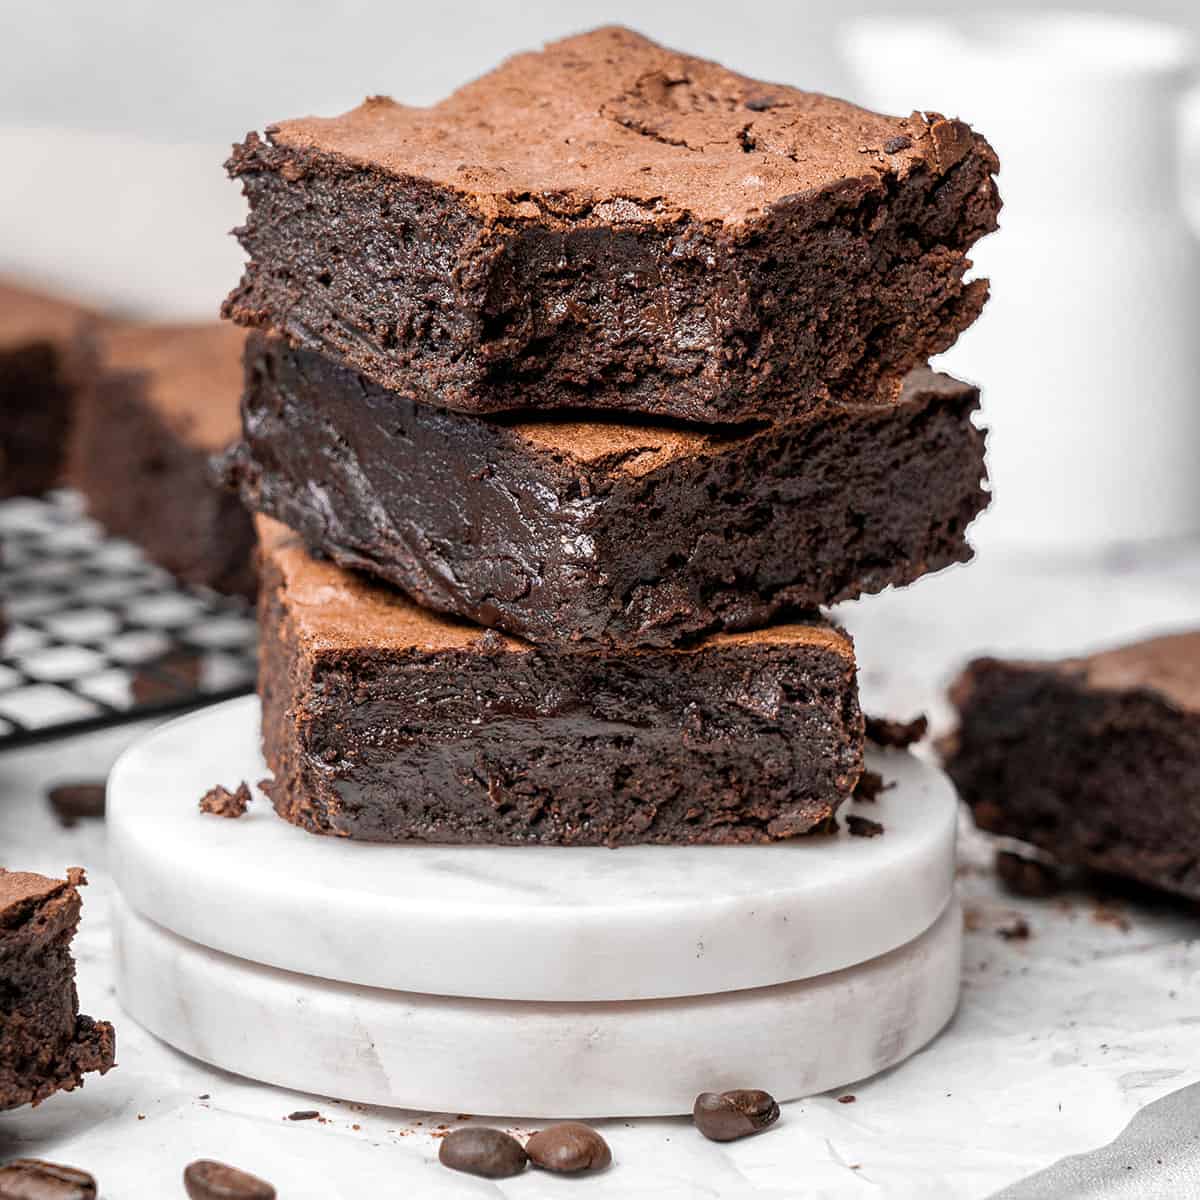 24 Effortless Desserts To Bake in a Hurry